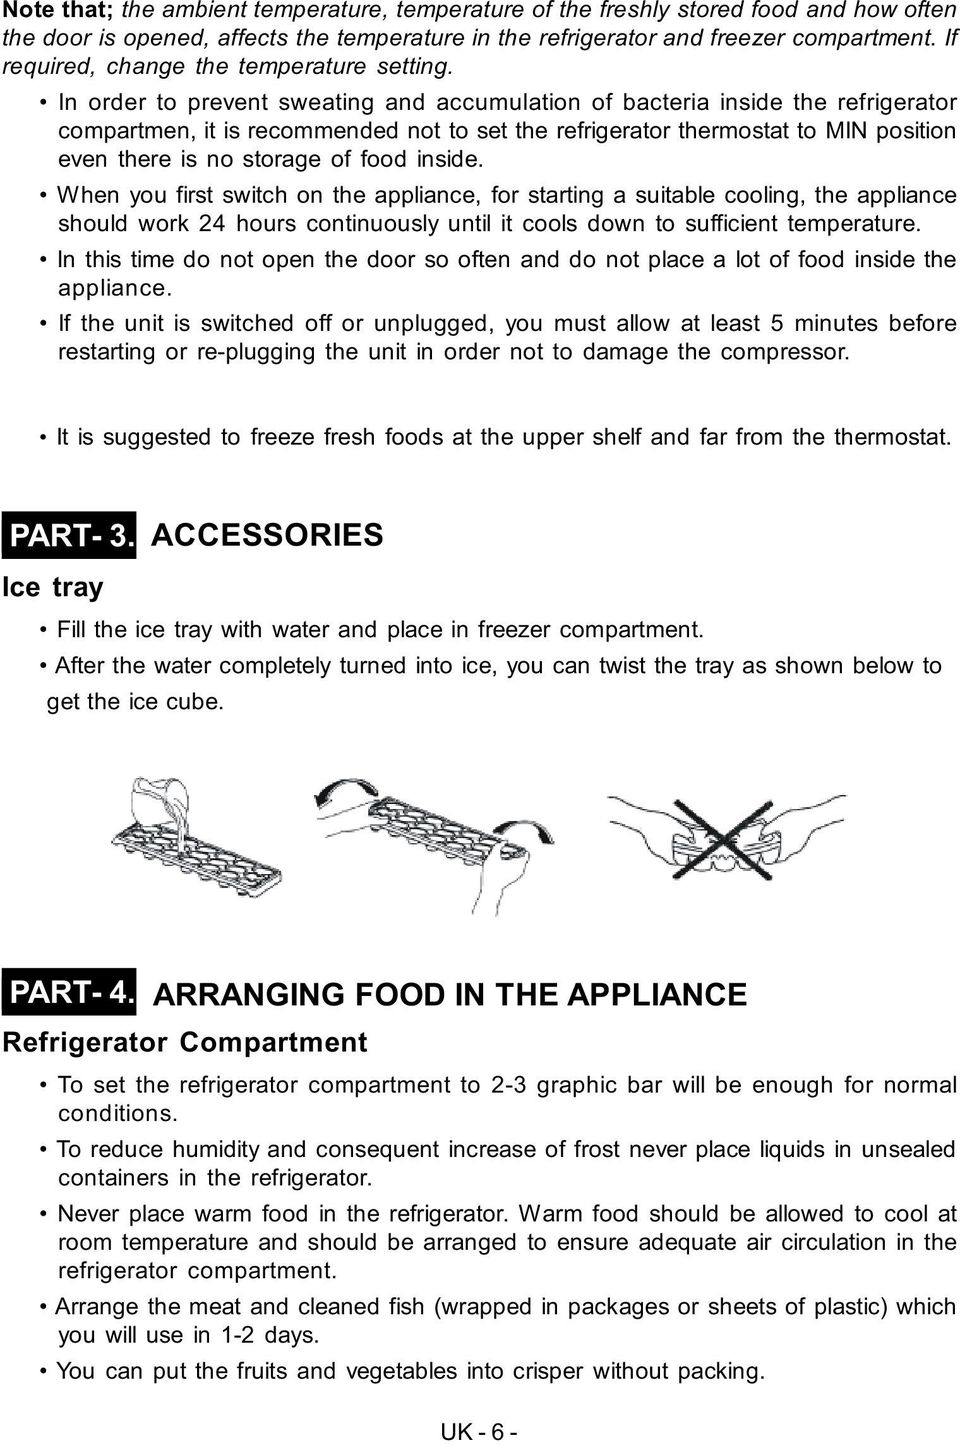 In order to prevent sweating and accumulation of bacteria inside the refrigerator compartmen, it is recommended not to set the refrigerator thermostat to MIN position even there is no storage of food